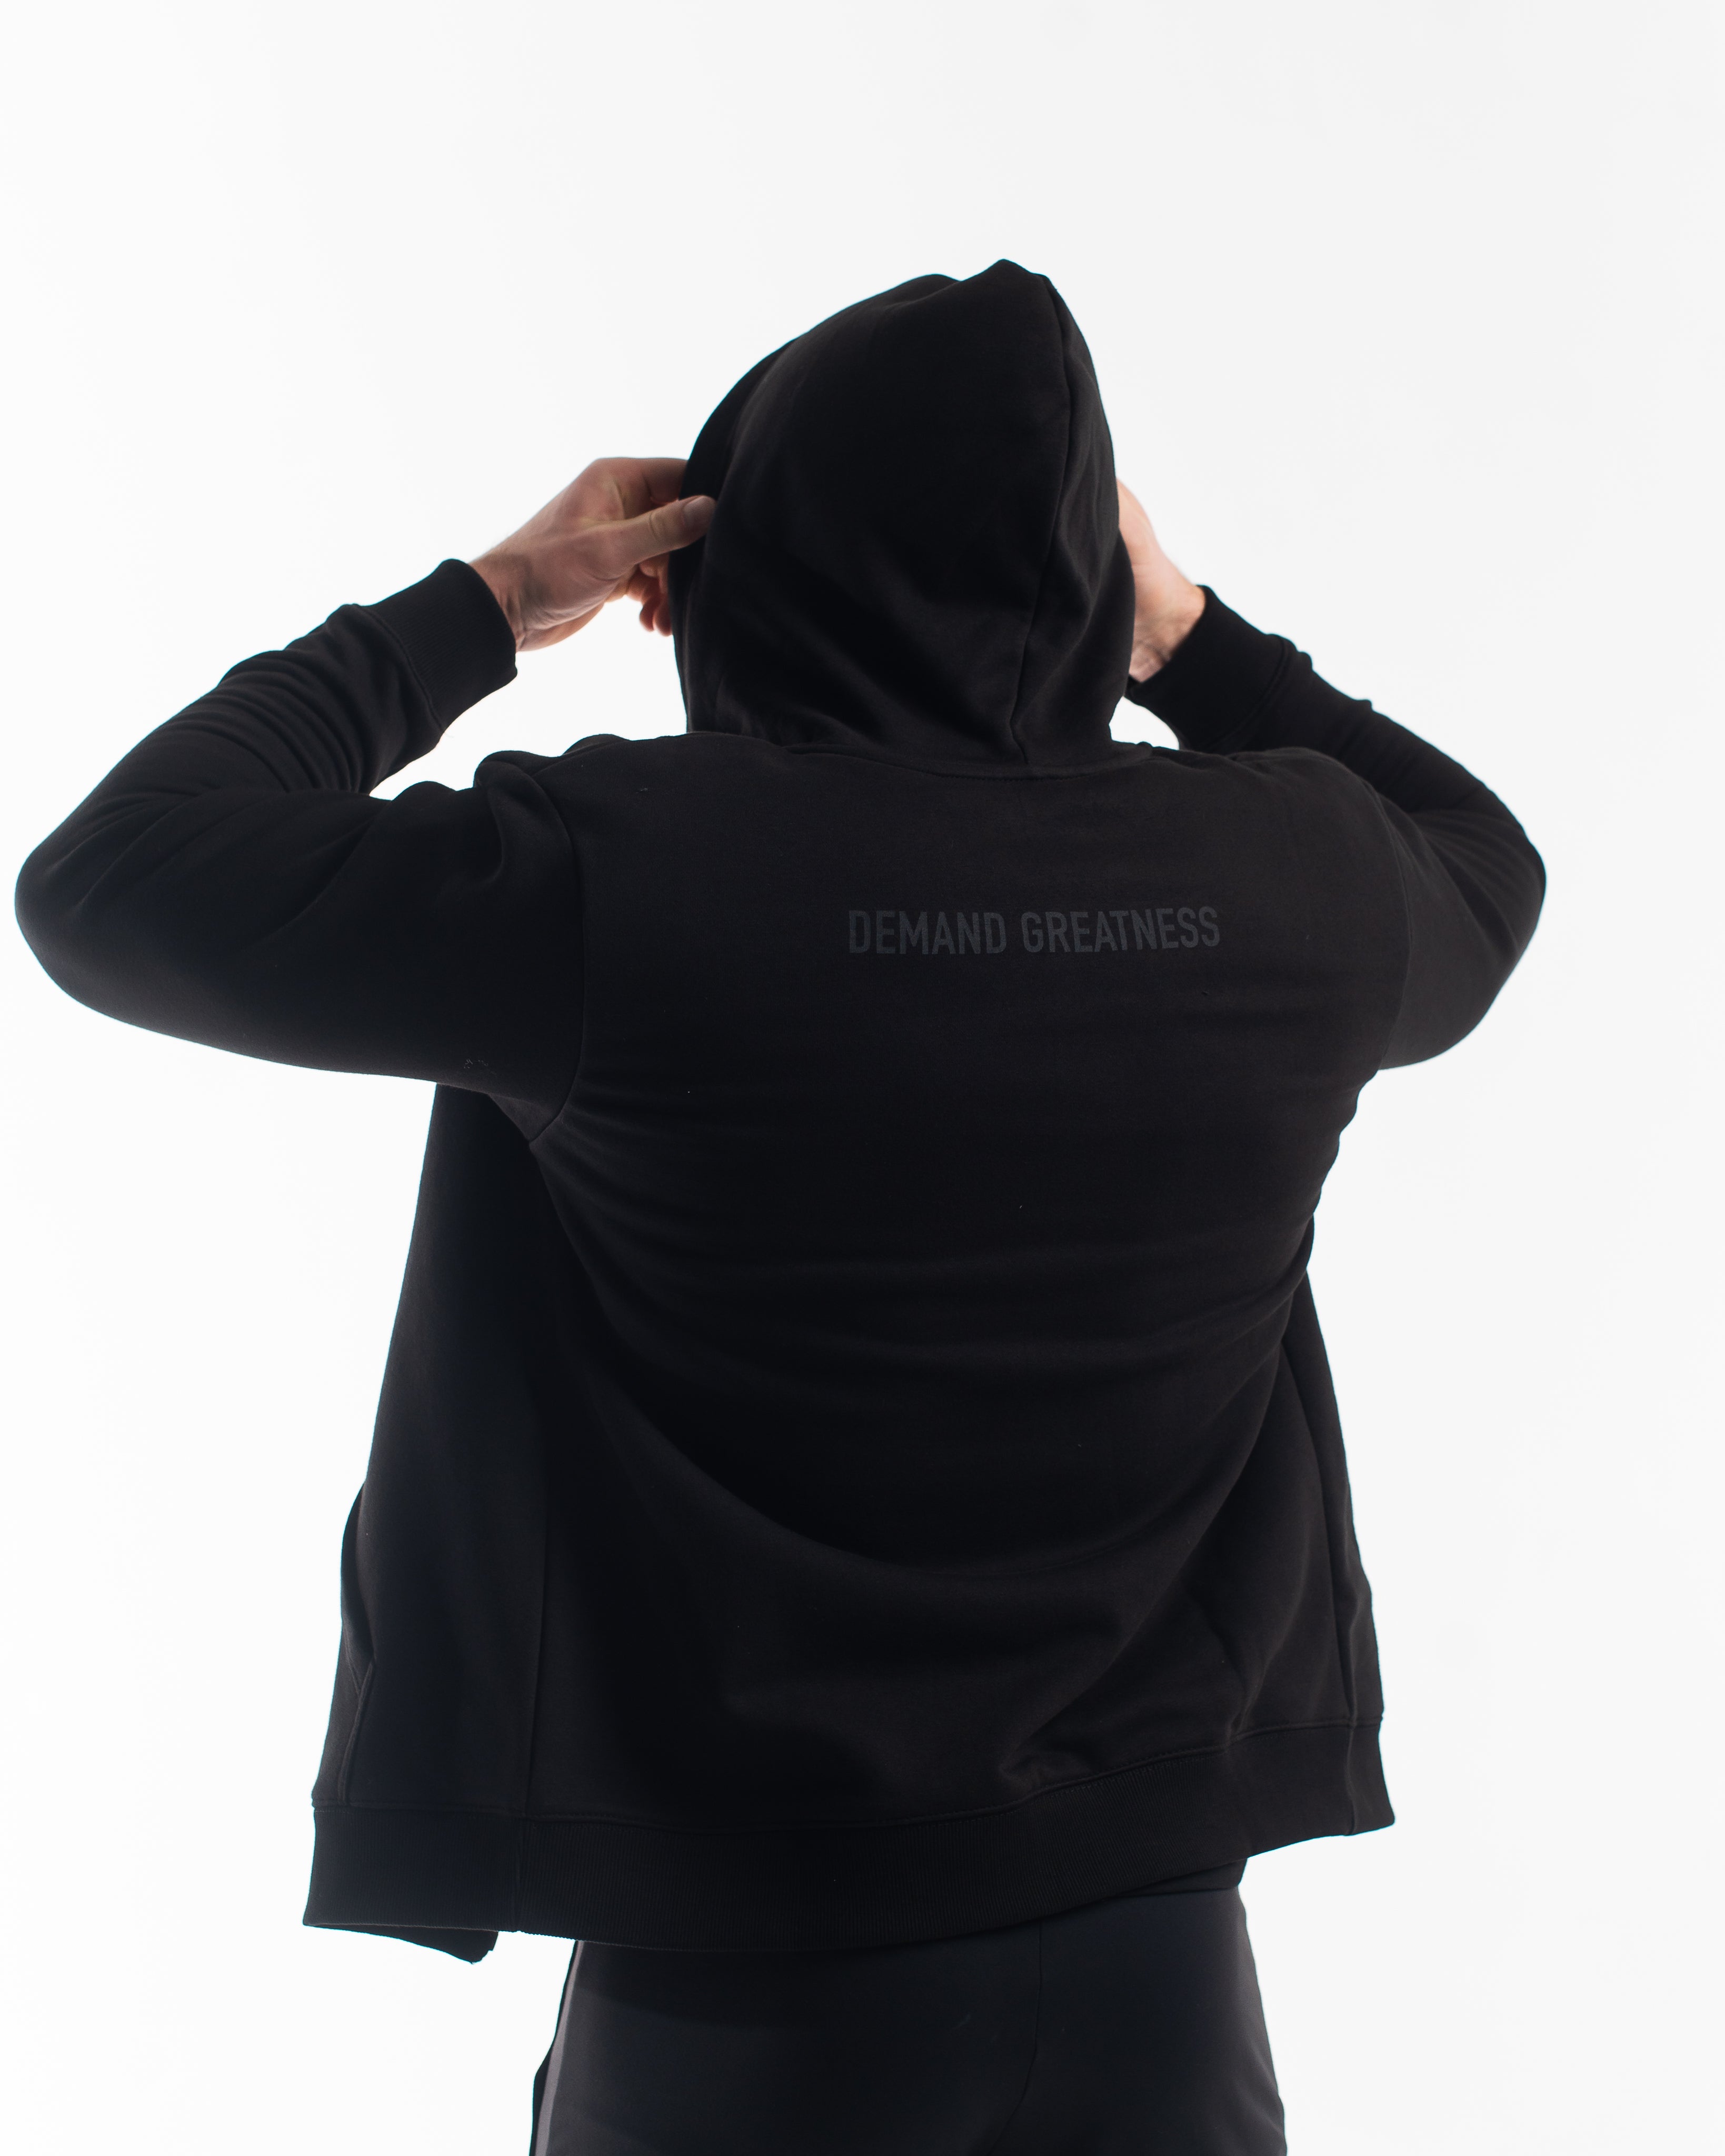 Stealth Demand Greatness is a zip up hoodie great for casual wear or lifting in the gym. Purchase Stealth zip up hoodie in UK and Europe from A7 UK. A7 have the best Bar Grip Tshirts, shipping to UK and Europe from A7 UK. A7UK supplies the best Powerlifting apparel for all your workouts. Available in UK and Europe including France, Italy, Germany, the Netherlands, Sweden and Poland.